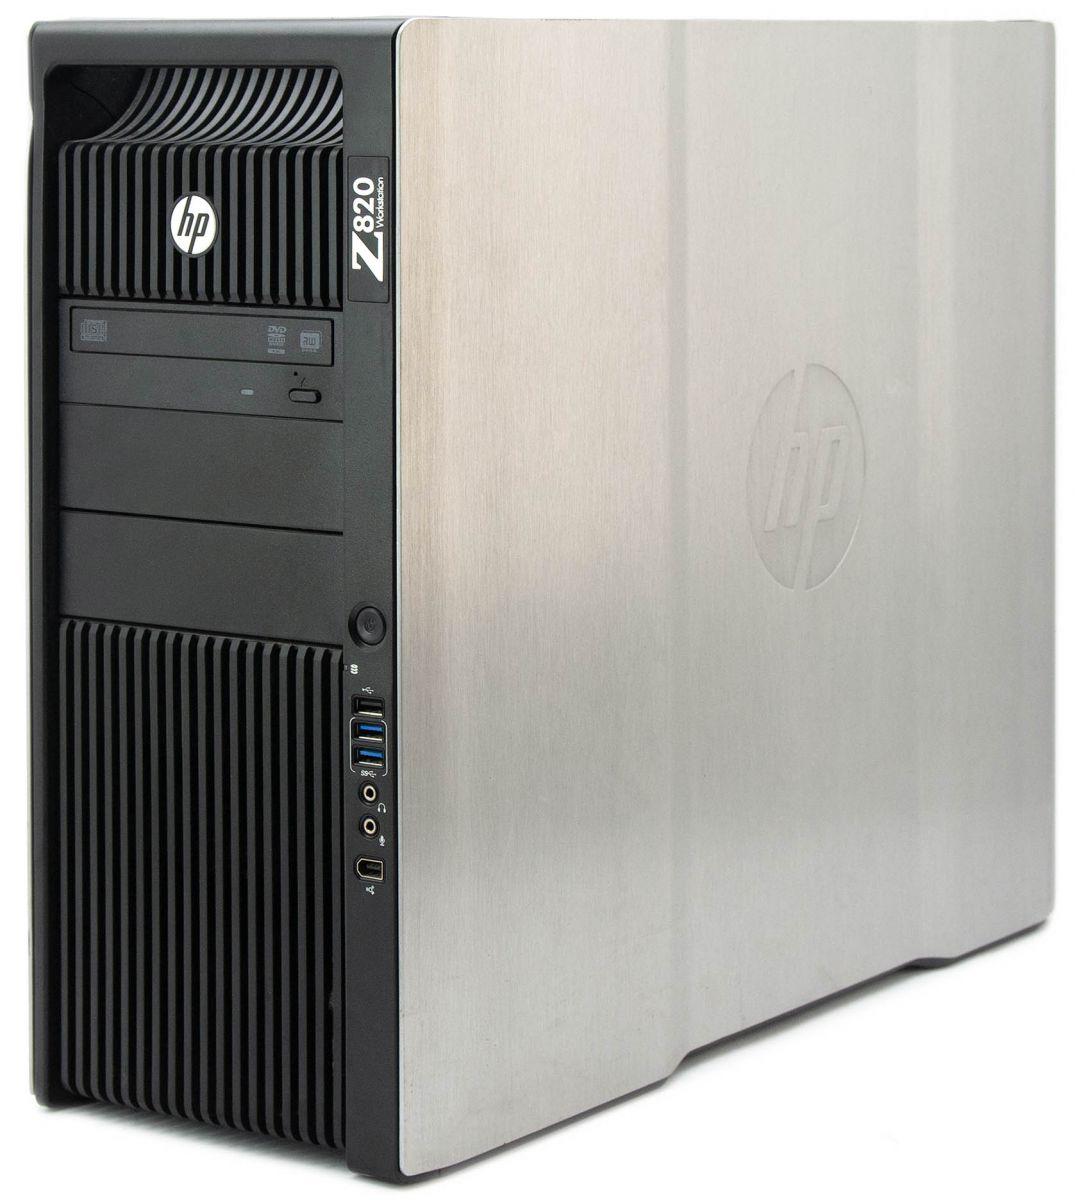 HP Z820 Workstation Tower Computer 2x Xeon E5-2630 V2